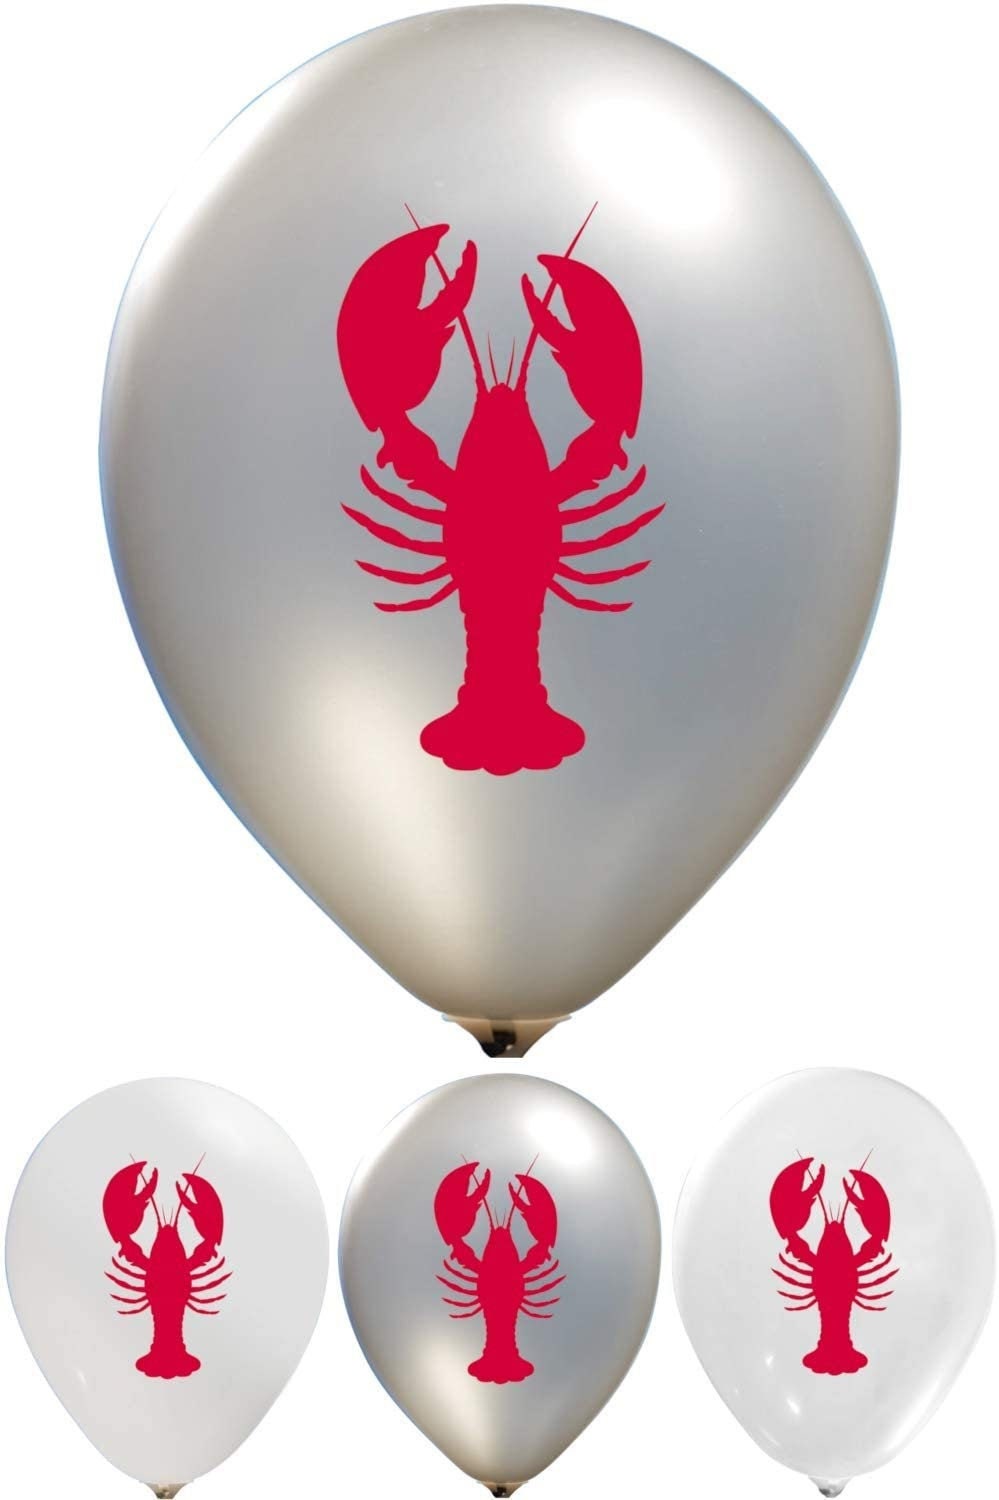 Crawfish Red Latex 12 Double Sided Printed Balloons Lobster Seafood Boil Party New Orleans Cajun Birthday Helium